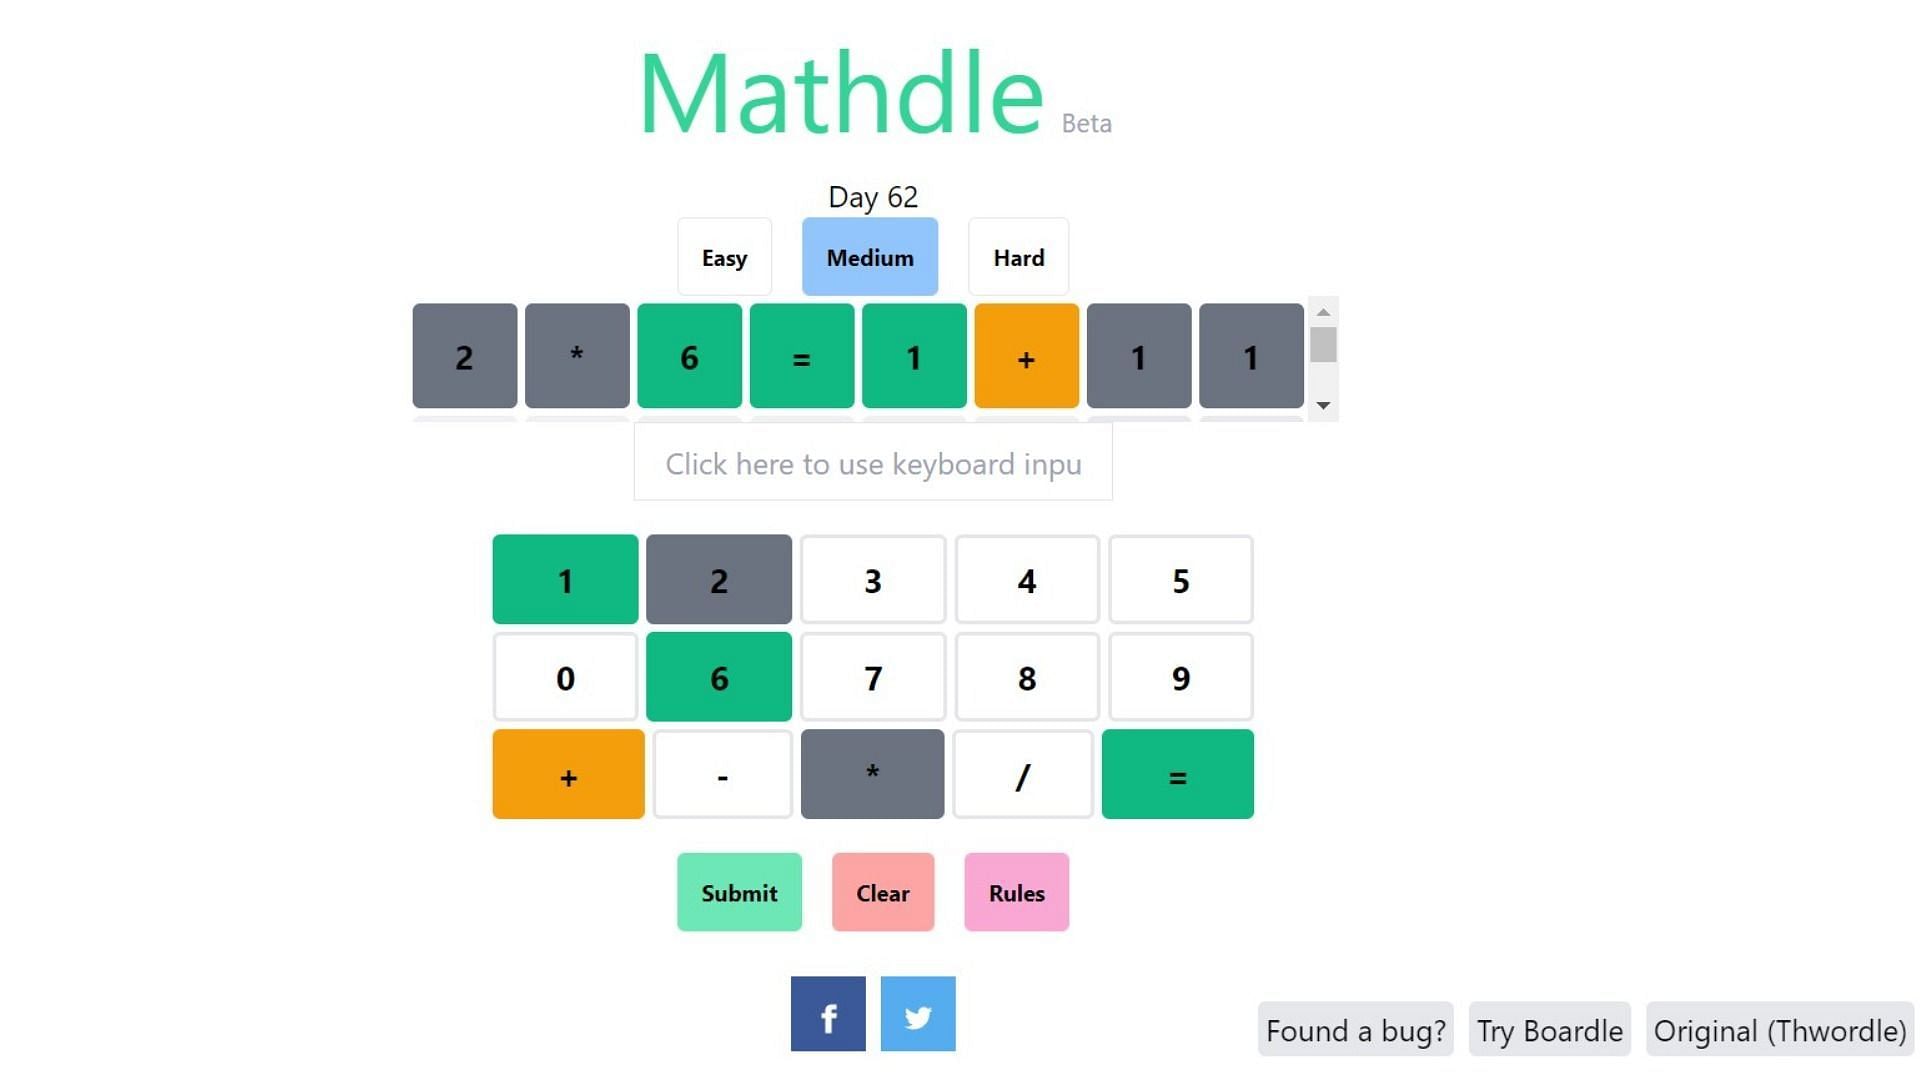 Mathdle requires players to guess mathematical equations, available in three modes of difficulty (Image via Mathdle)